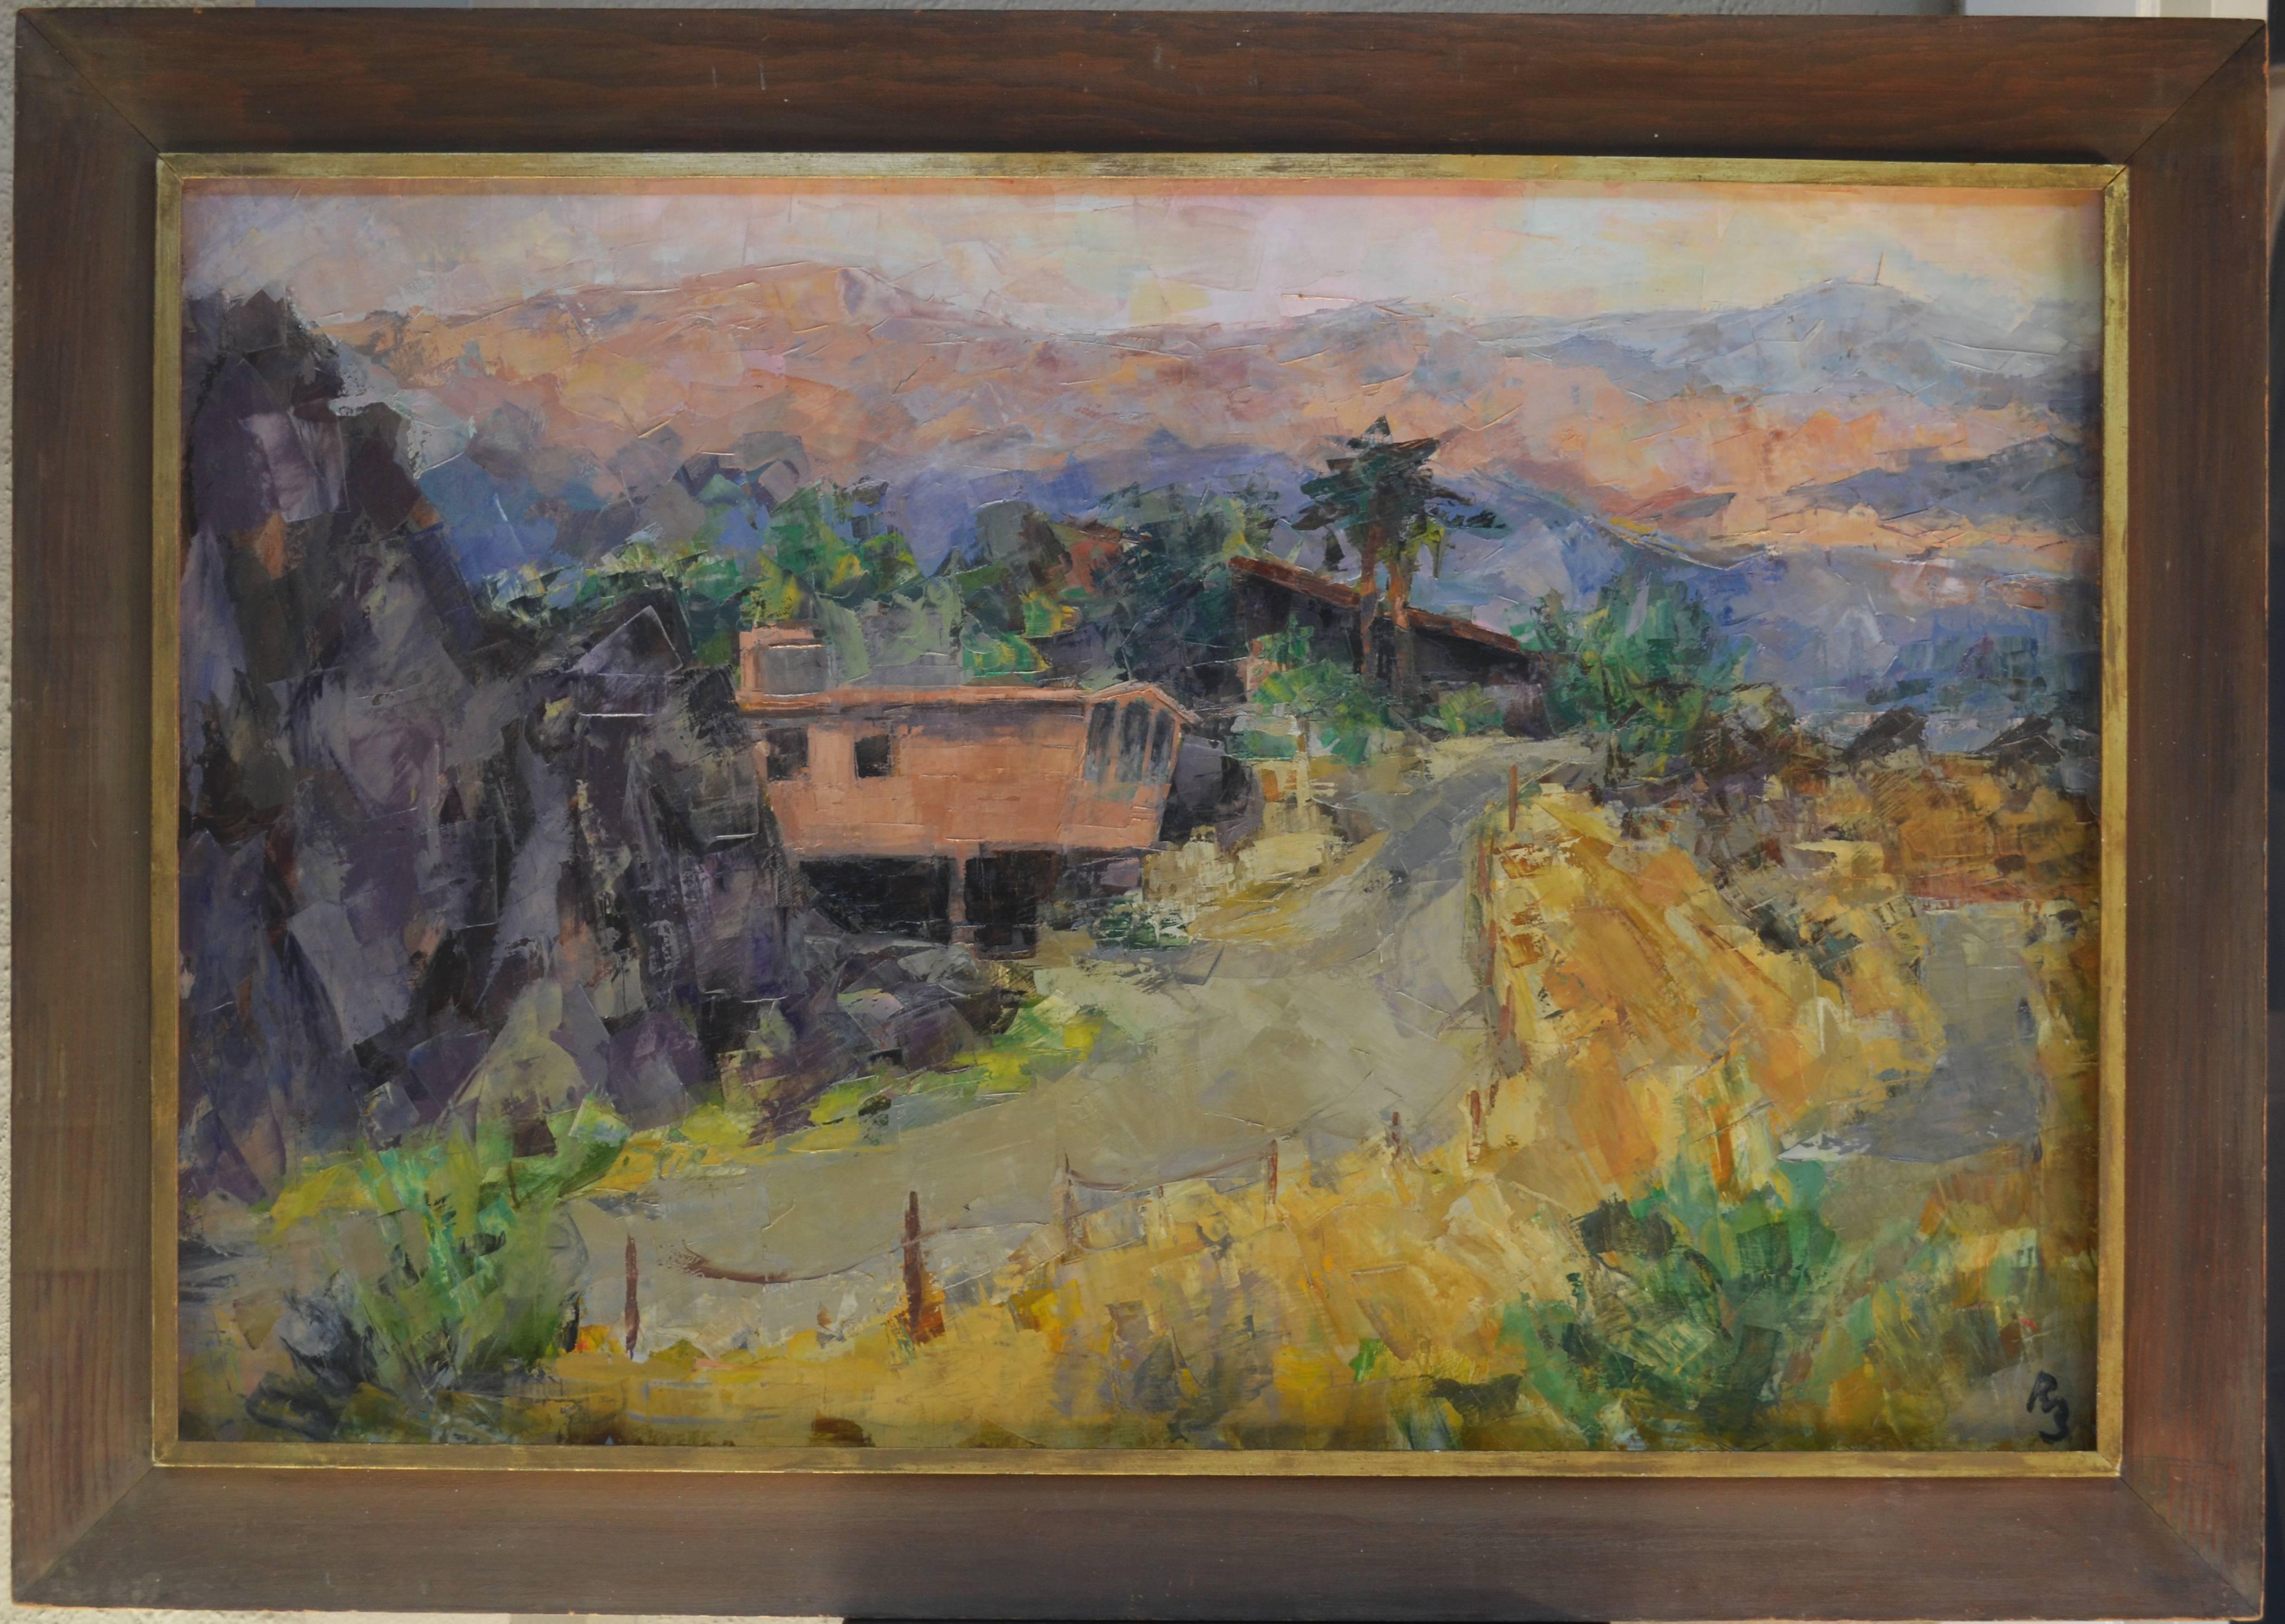 Palm Springs Road - Painting by Ron Blumberg